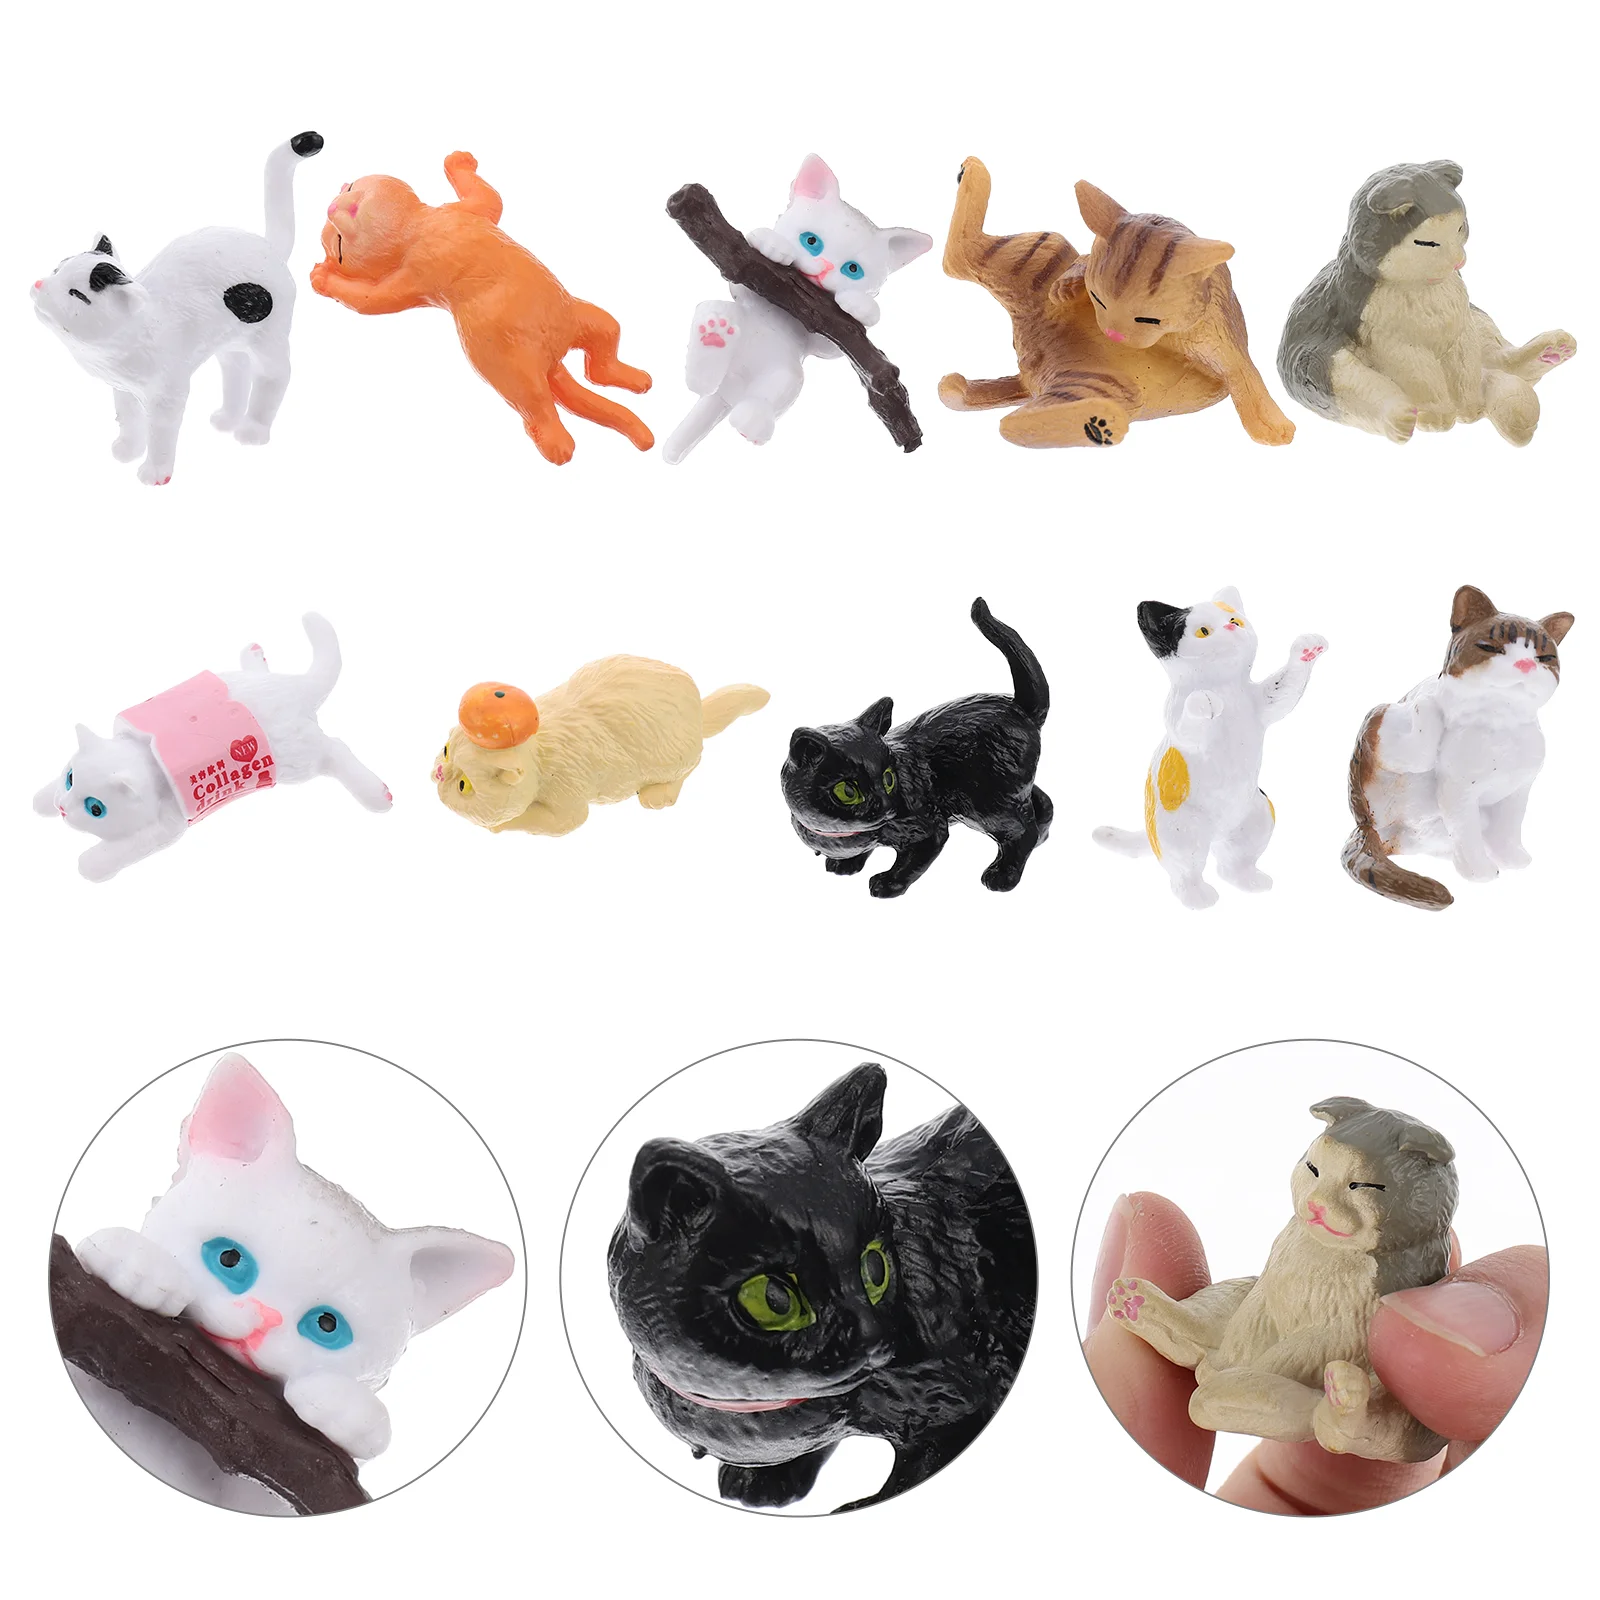 

Cat Miniature Toy Decor Figurines Cake Figure Landscape Micro Figures Educational Toys Character Toppercartoon Cats Animal